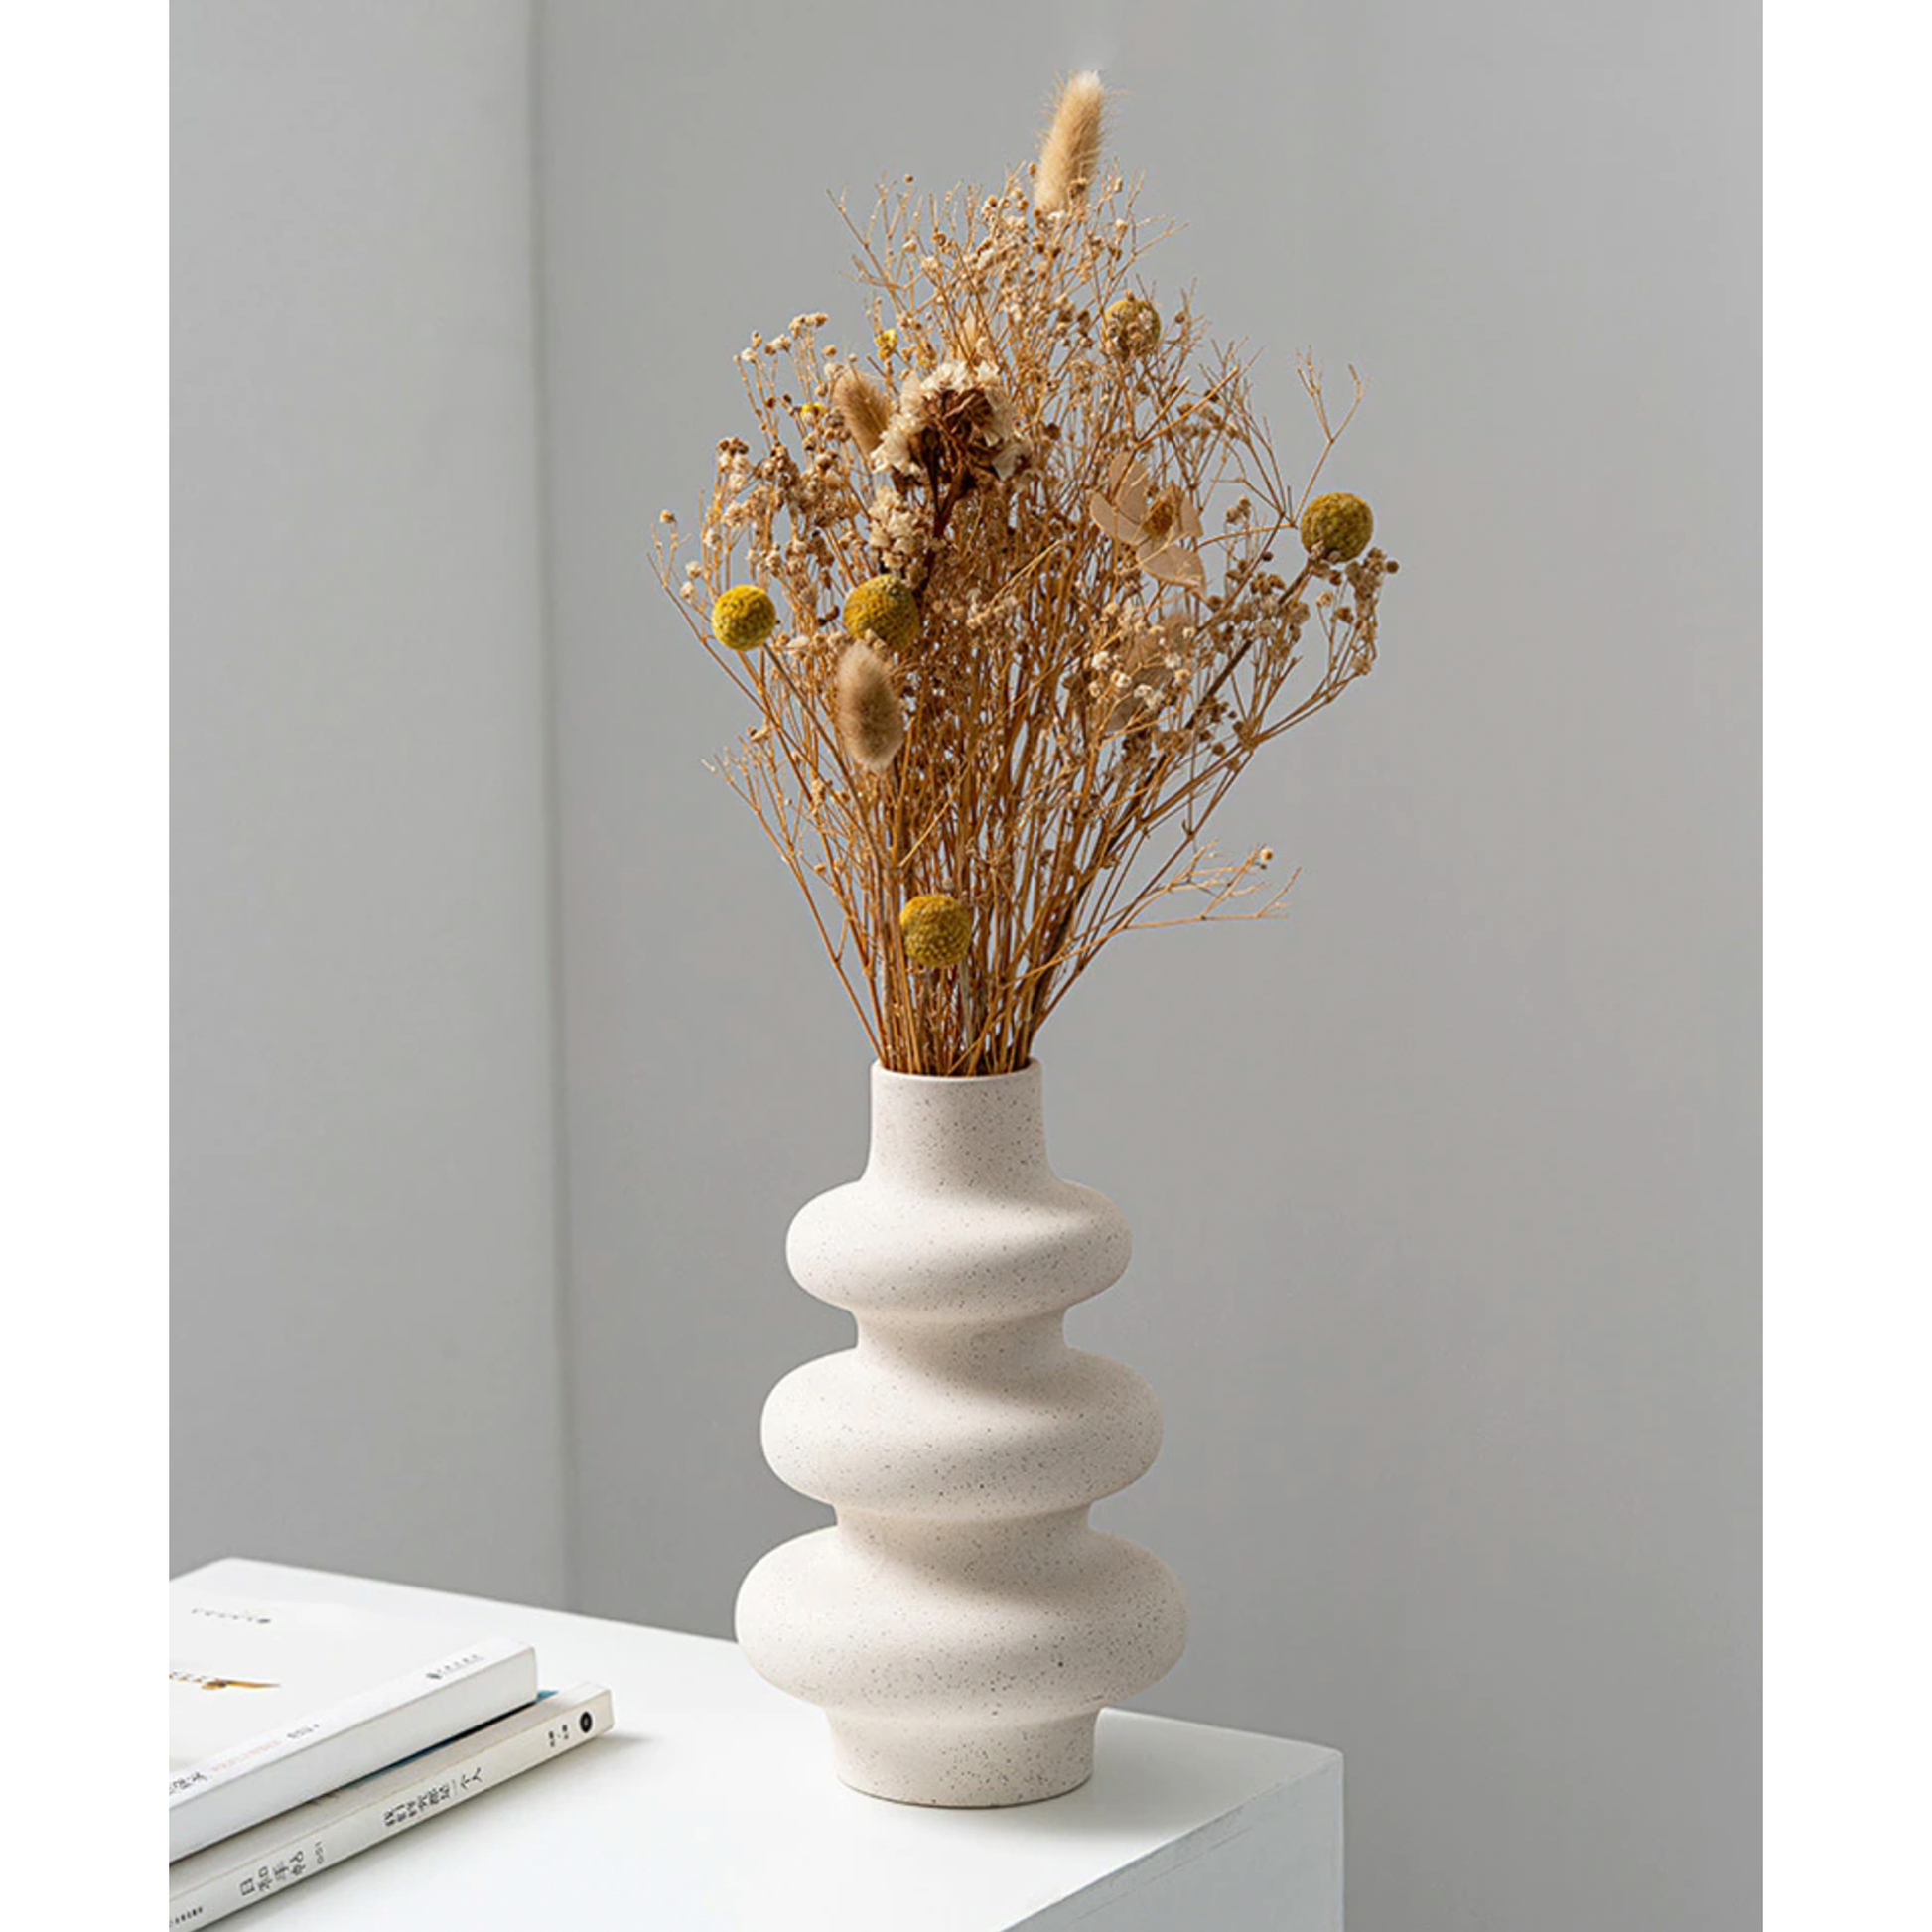 Boho beige vase. Suitable for pampas grass, dried or fresh flowers.